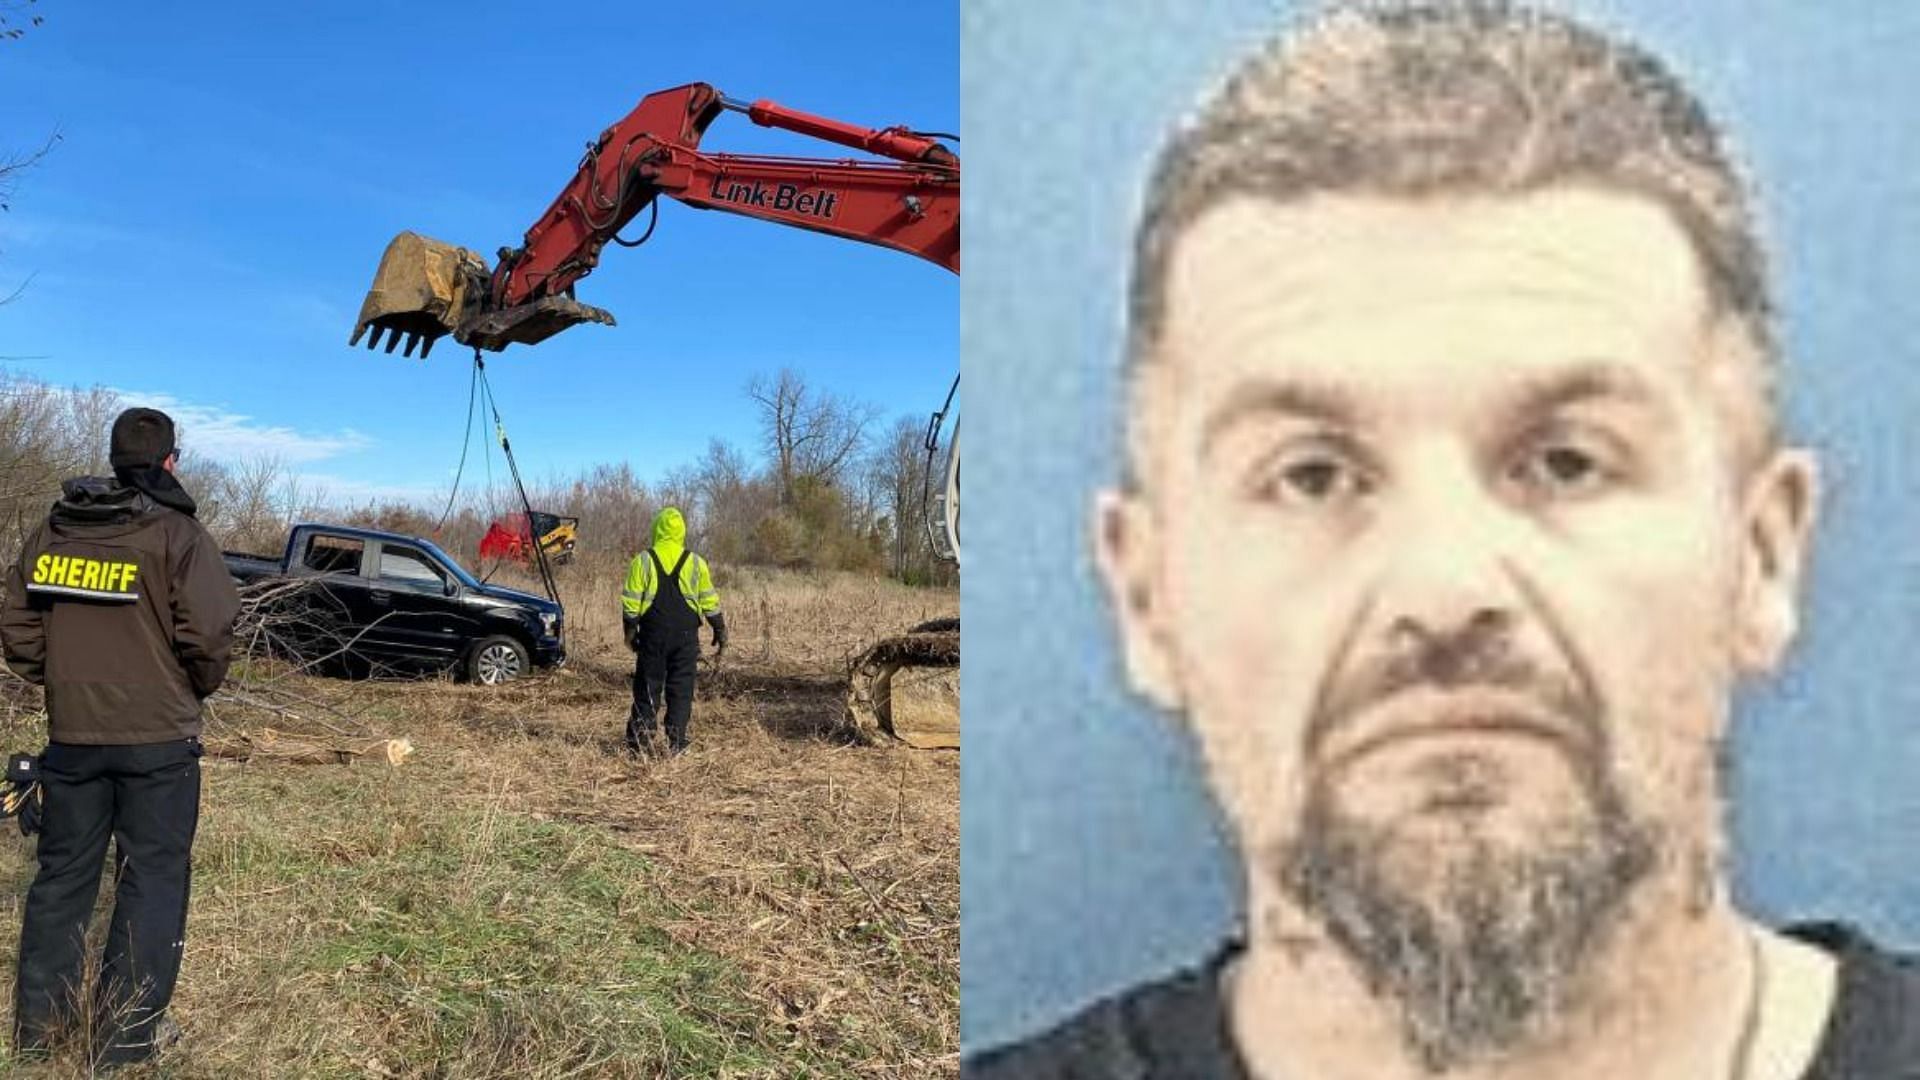 Emma Sweet&rsquo;s body was discovered miles away from where her father Jeremy Sweet&#039;s truck was discovered (Image via Bartholomew County Sheriff&rsquo;s Office)